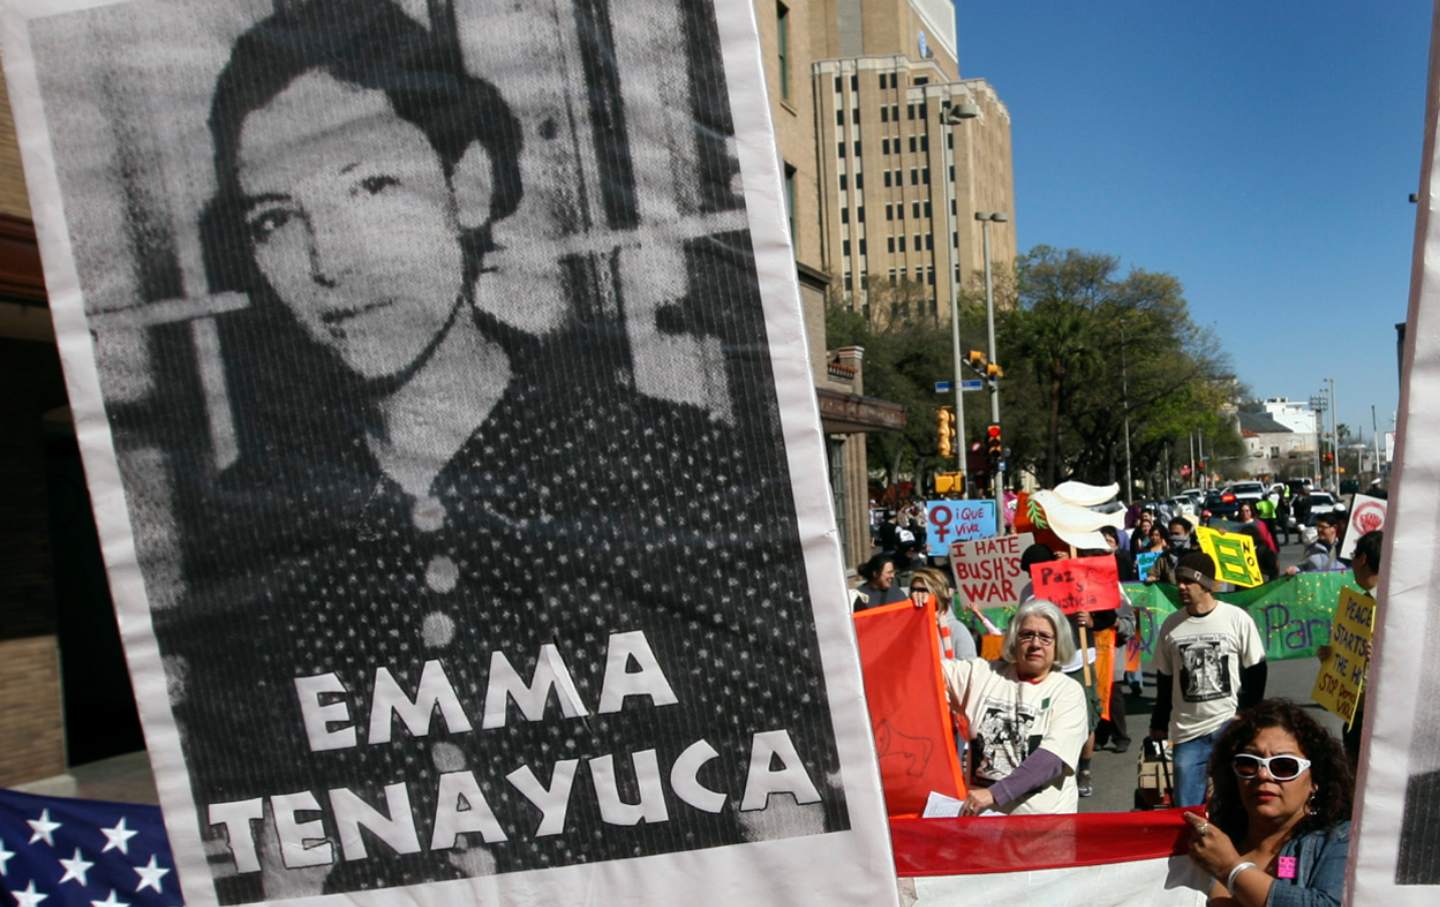 A sign featuring Emma Tenayuca takes front and center at a march for International Women's Day